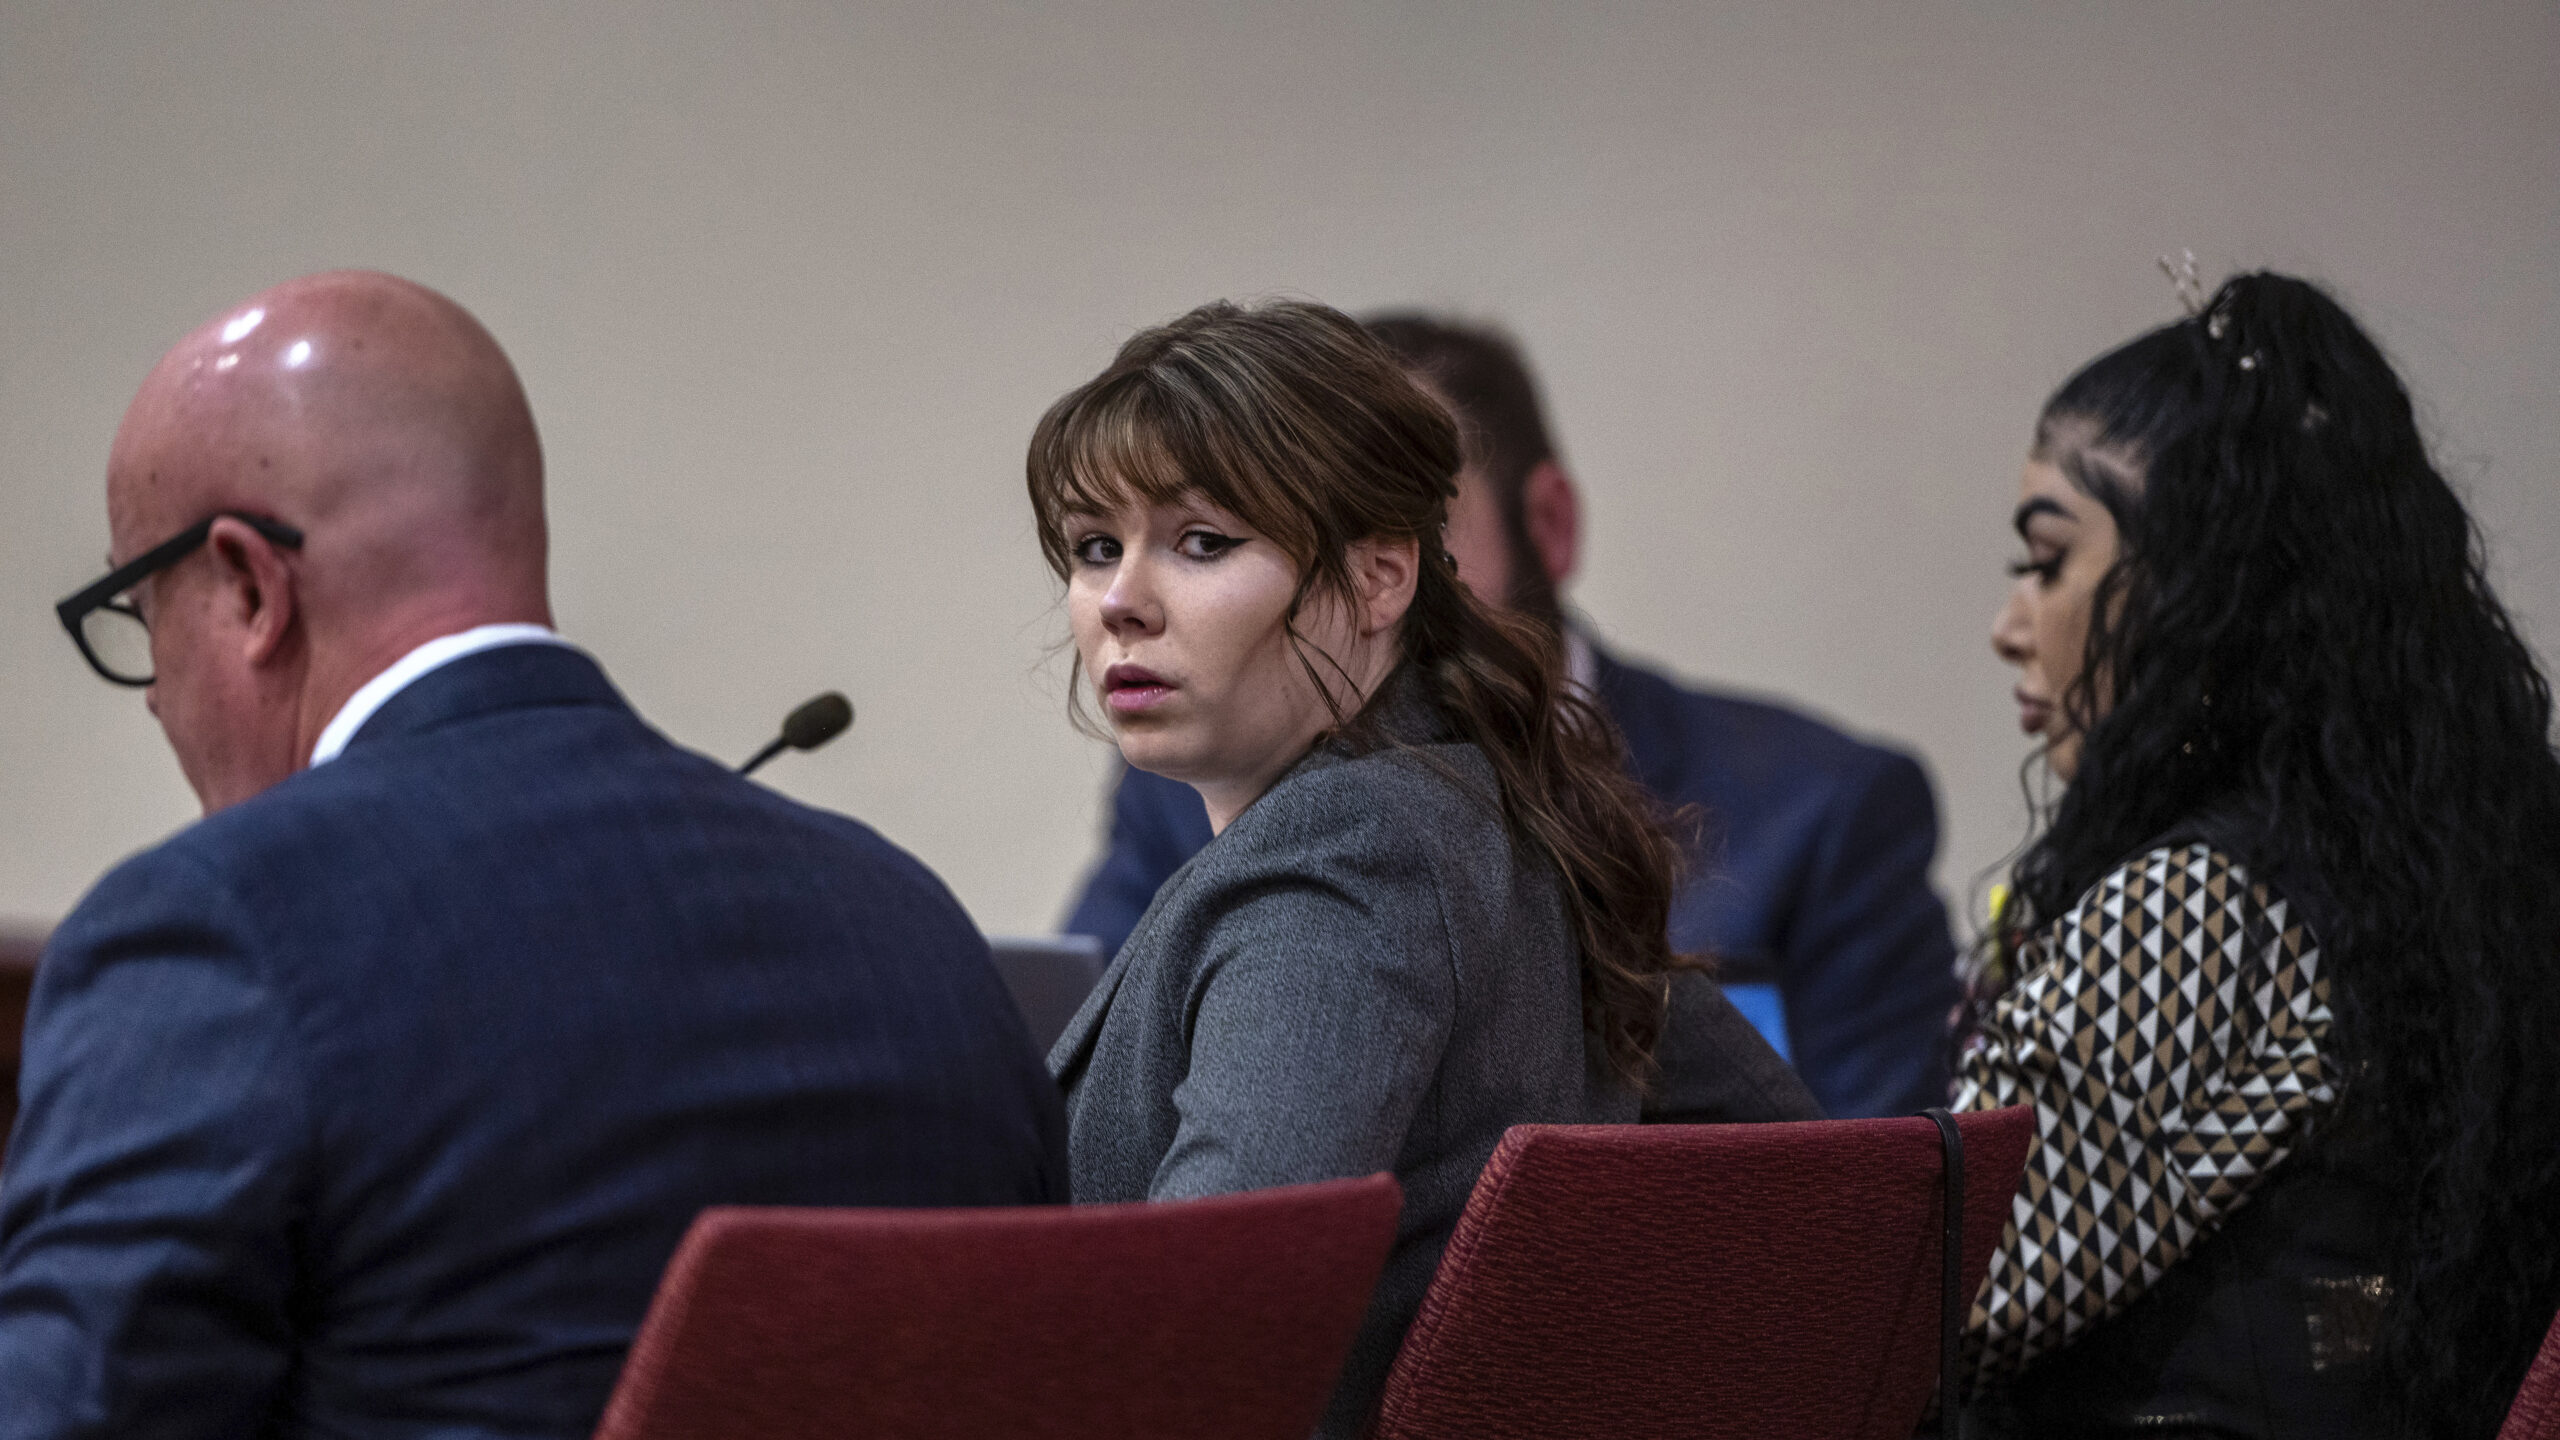 Hannah Gutierrez-Reed, center, sits with her attorney Jason Bowles, left, during the first day of t...